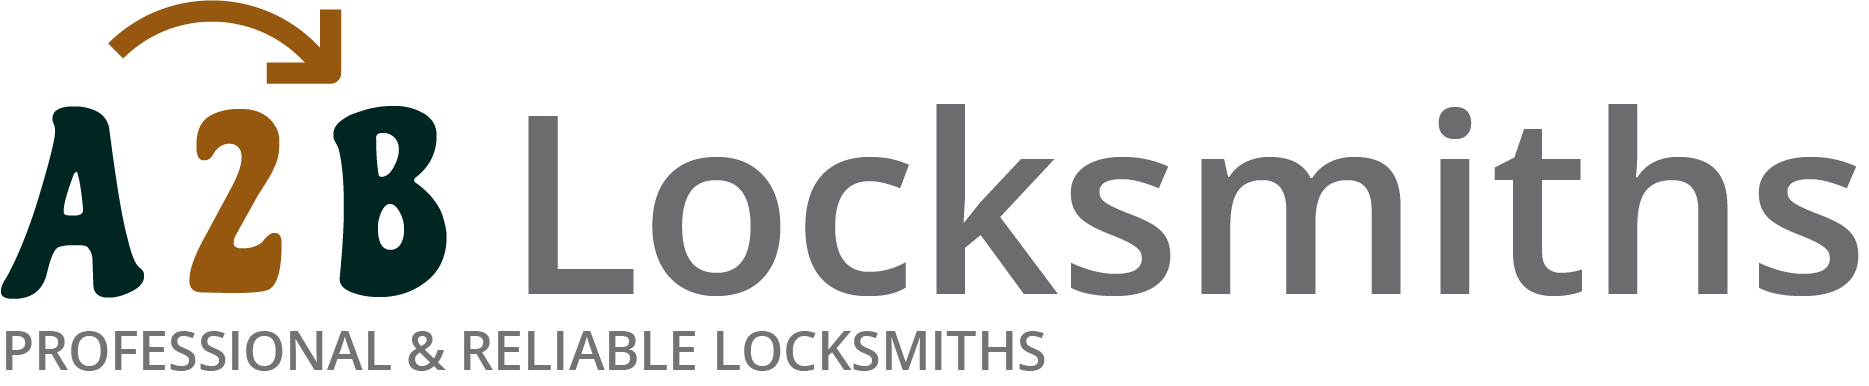 If you are locked out of house in Uckfield, our 24/7 local emergency locksmith services can help you.